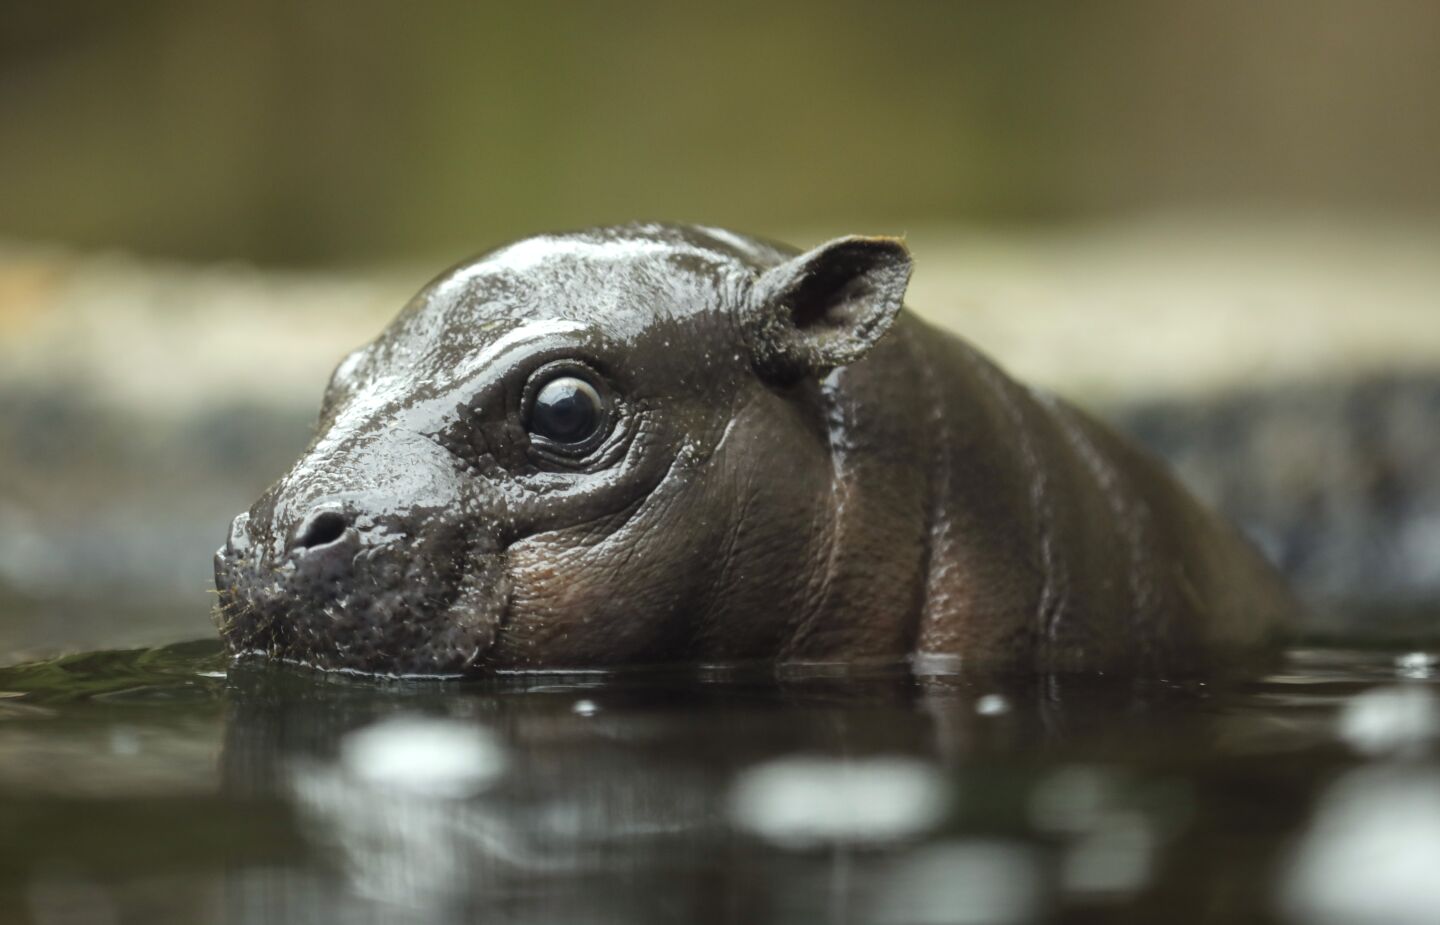 Akobi, a 40-pound, 67-day-old pygmy hippopotamus, wades in the water at the San Diego Zoo on June 15, 2020. Akobi was introduced to the public for the first time as it explored the main exhibit for the first time Monday.